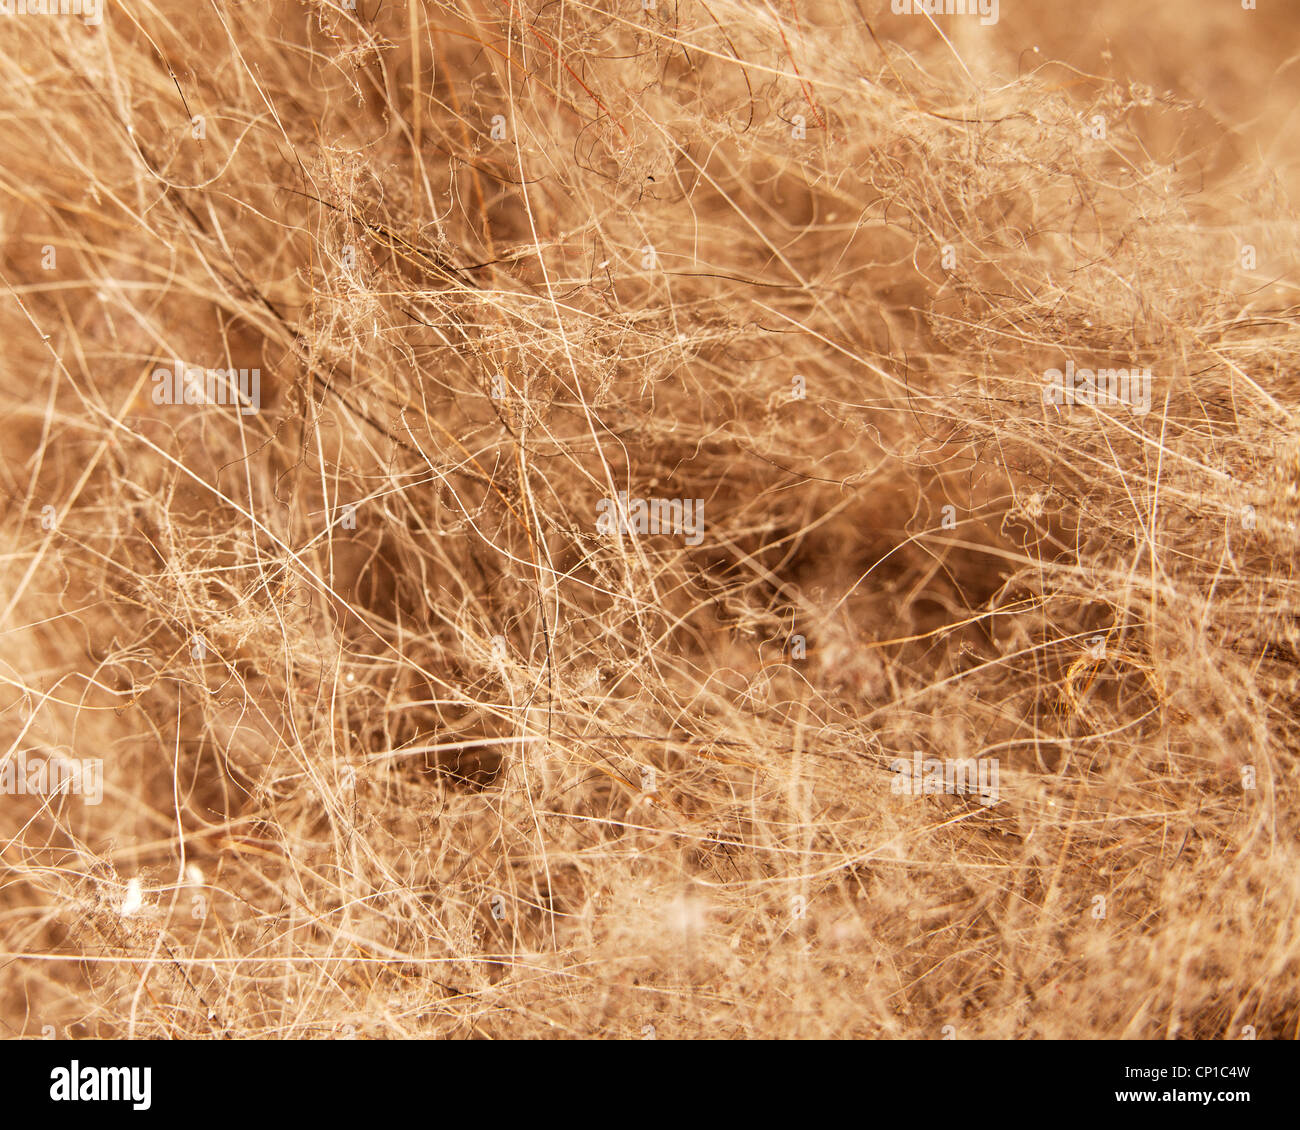 A dirt and dust texture with hair and fuzz Stock Photo